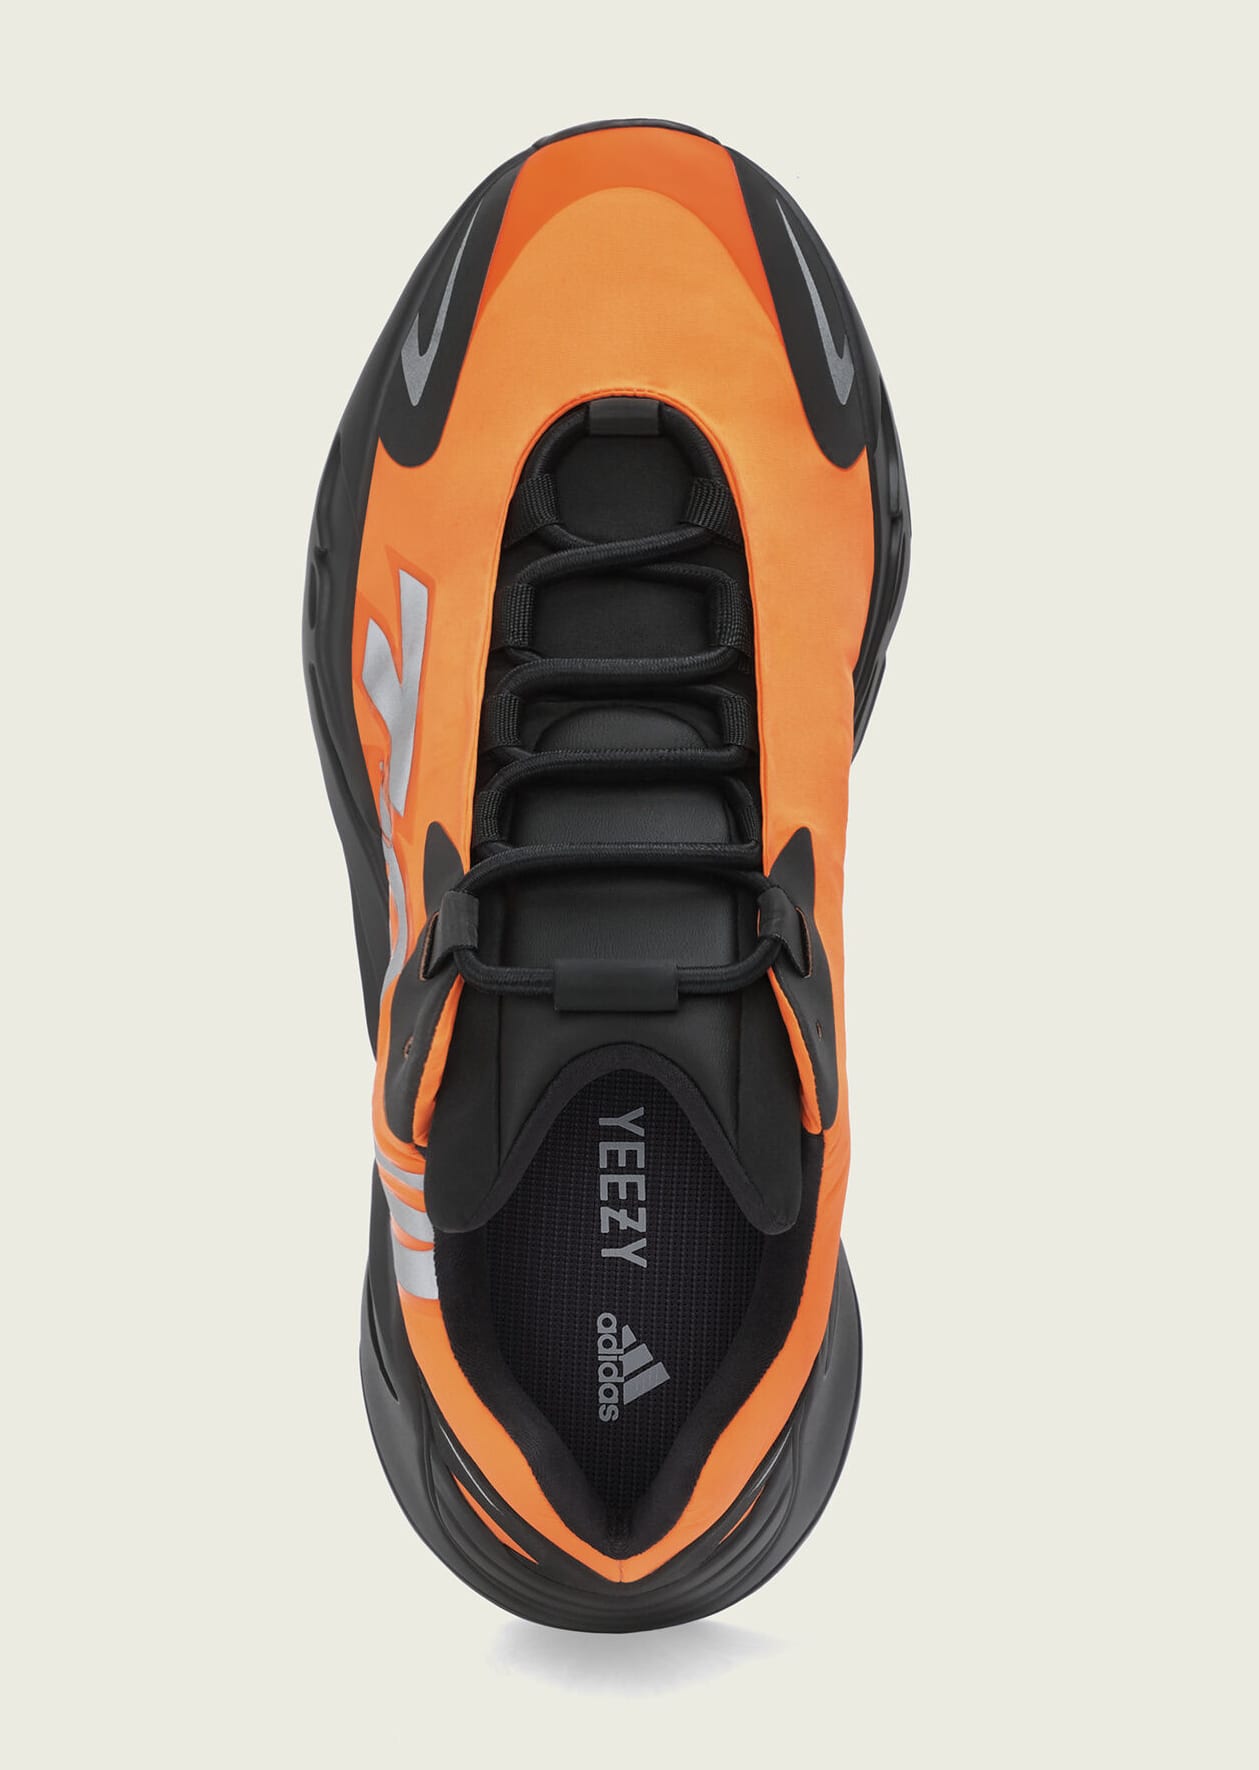 Adidas Yeezy Boost 700 MNVN &quot;Orange&quot; Officially Revealed: Photos